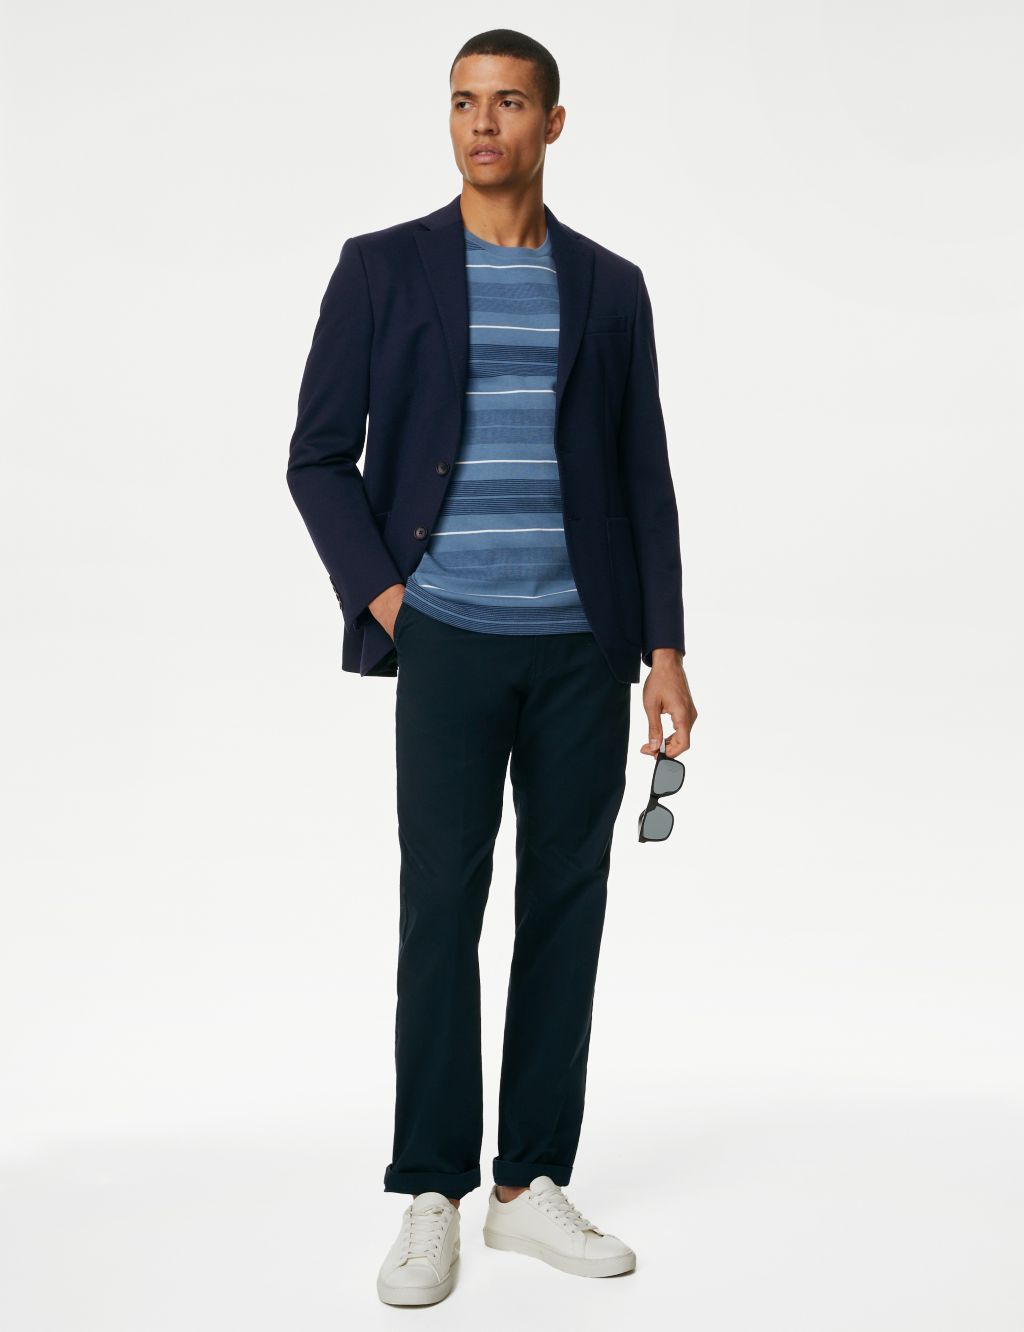 Textured Jersey Jacket with Stretch image 4